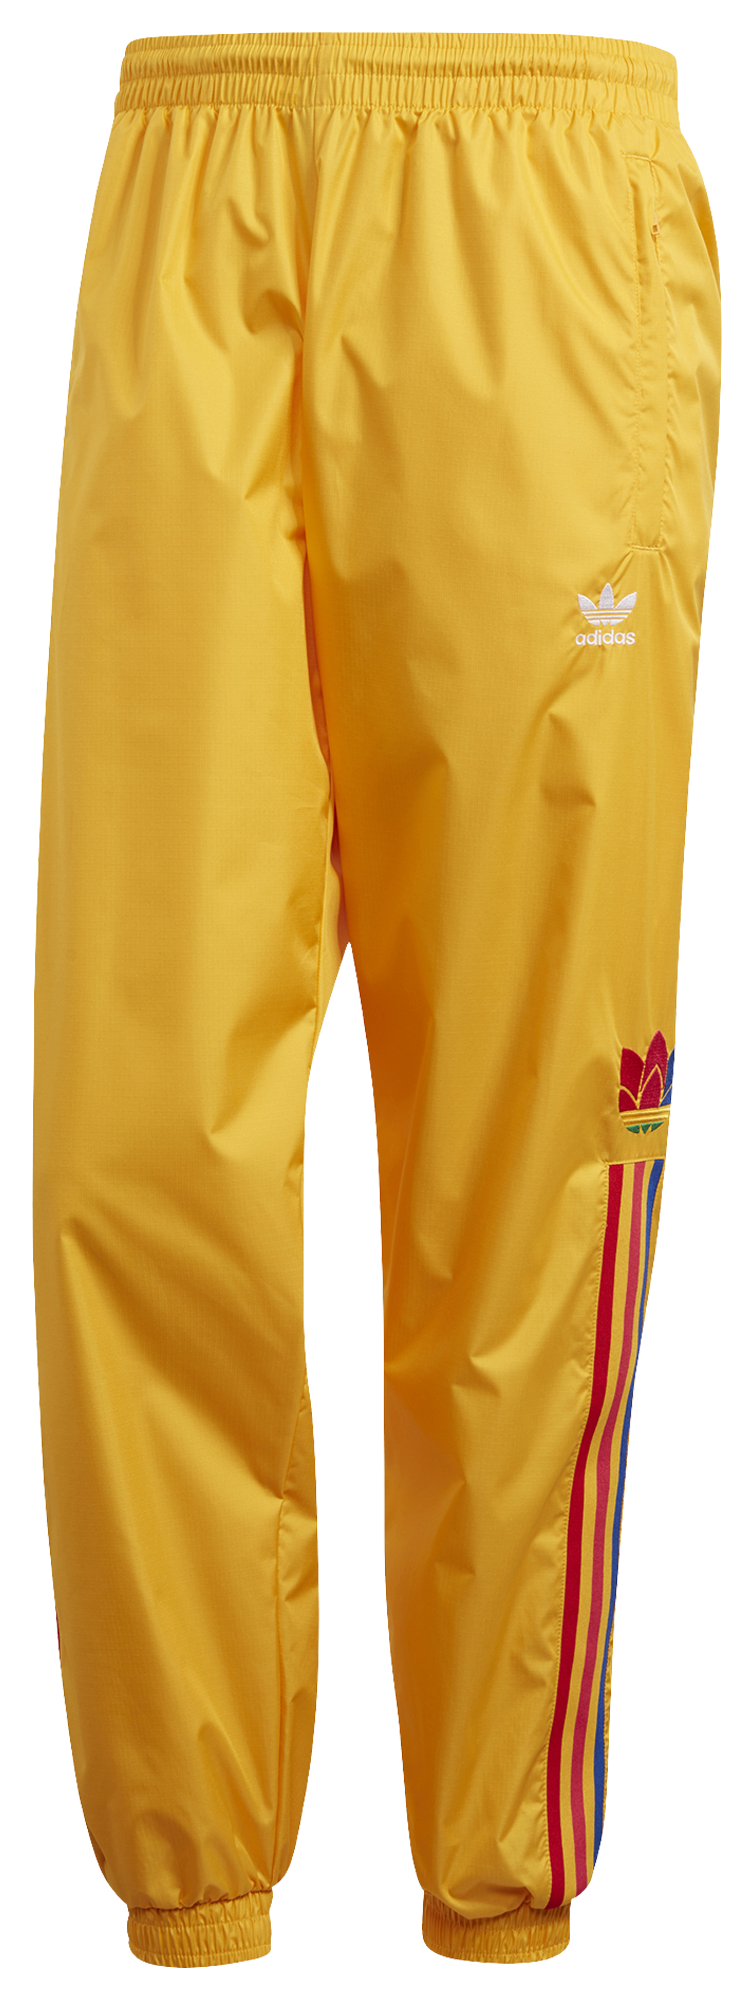 red and yellow adidas tracksuit